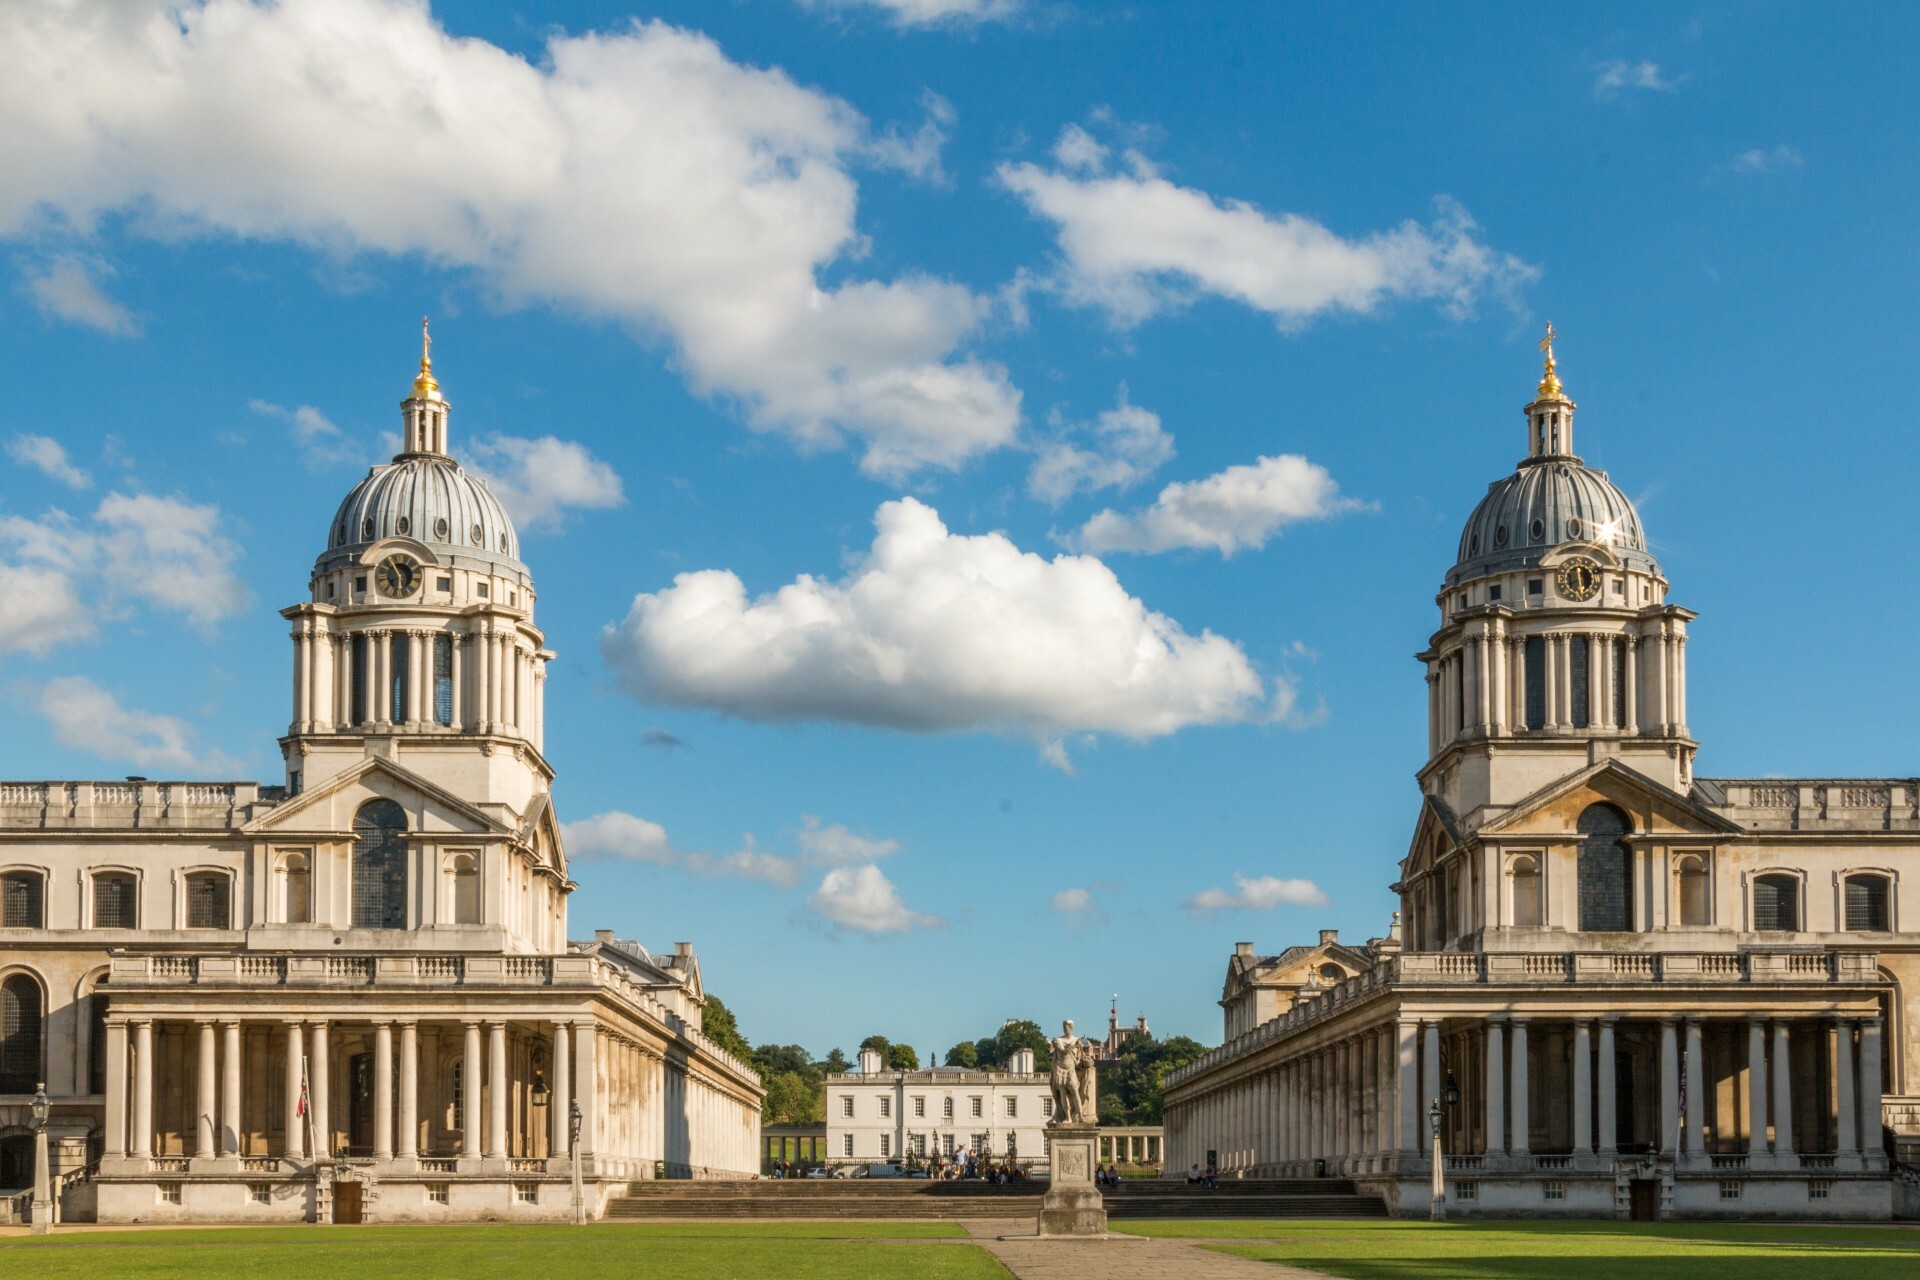 you’ll-soon-be-able-to-go-inside-the-iconic-domes-at-the-old-royal-naval-college